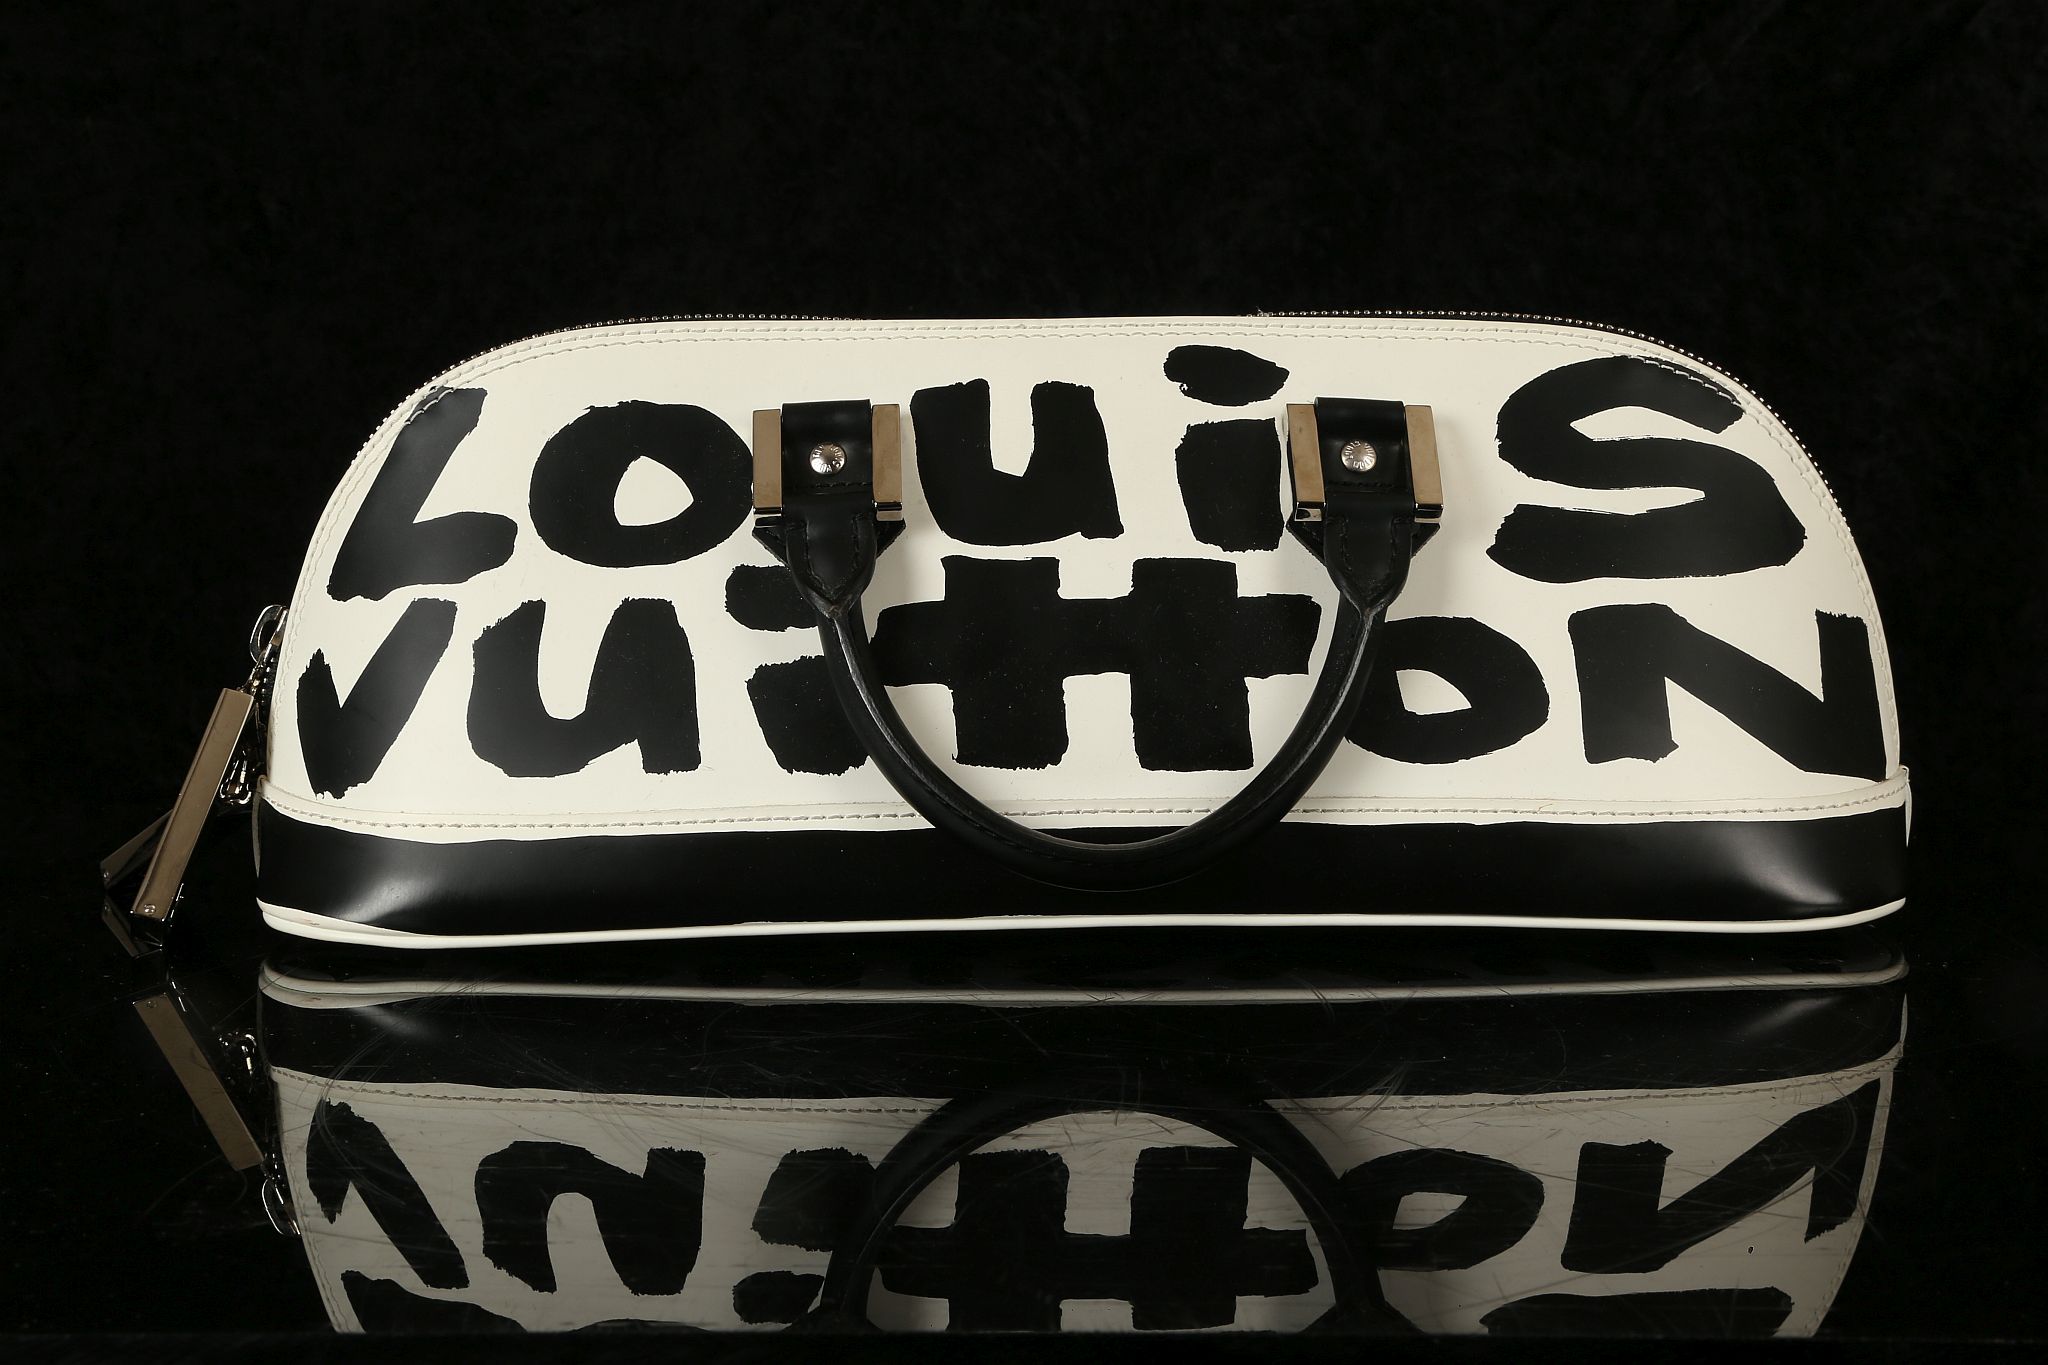 LOUIS VUITTON STEPHEN SPROUSE EAST/WEST ALMA BAG, date code for 2001, black and white graffiti - Image 8 of 14